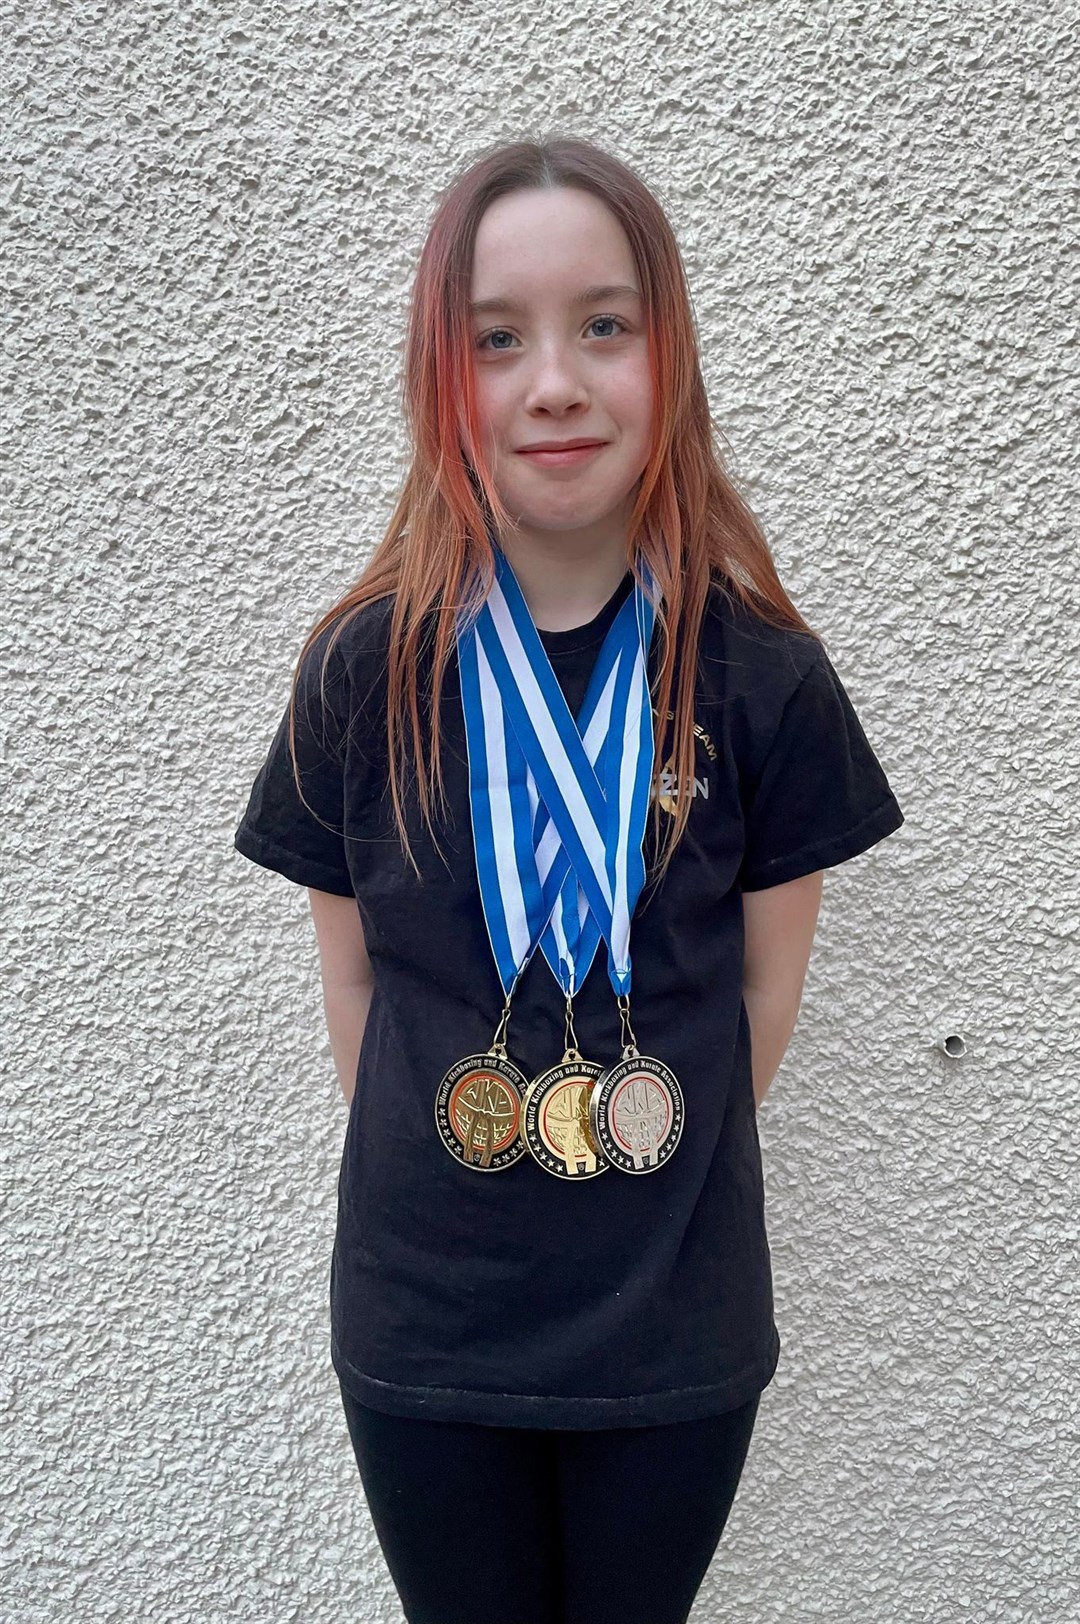 Ella McGillivray, a medal winner at the competition.